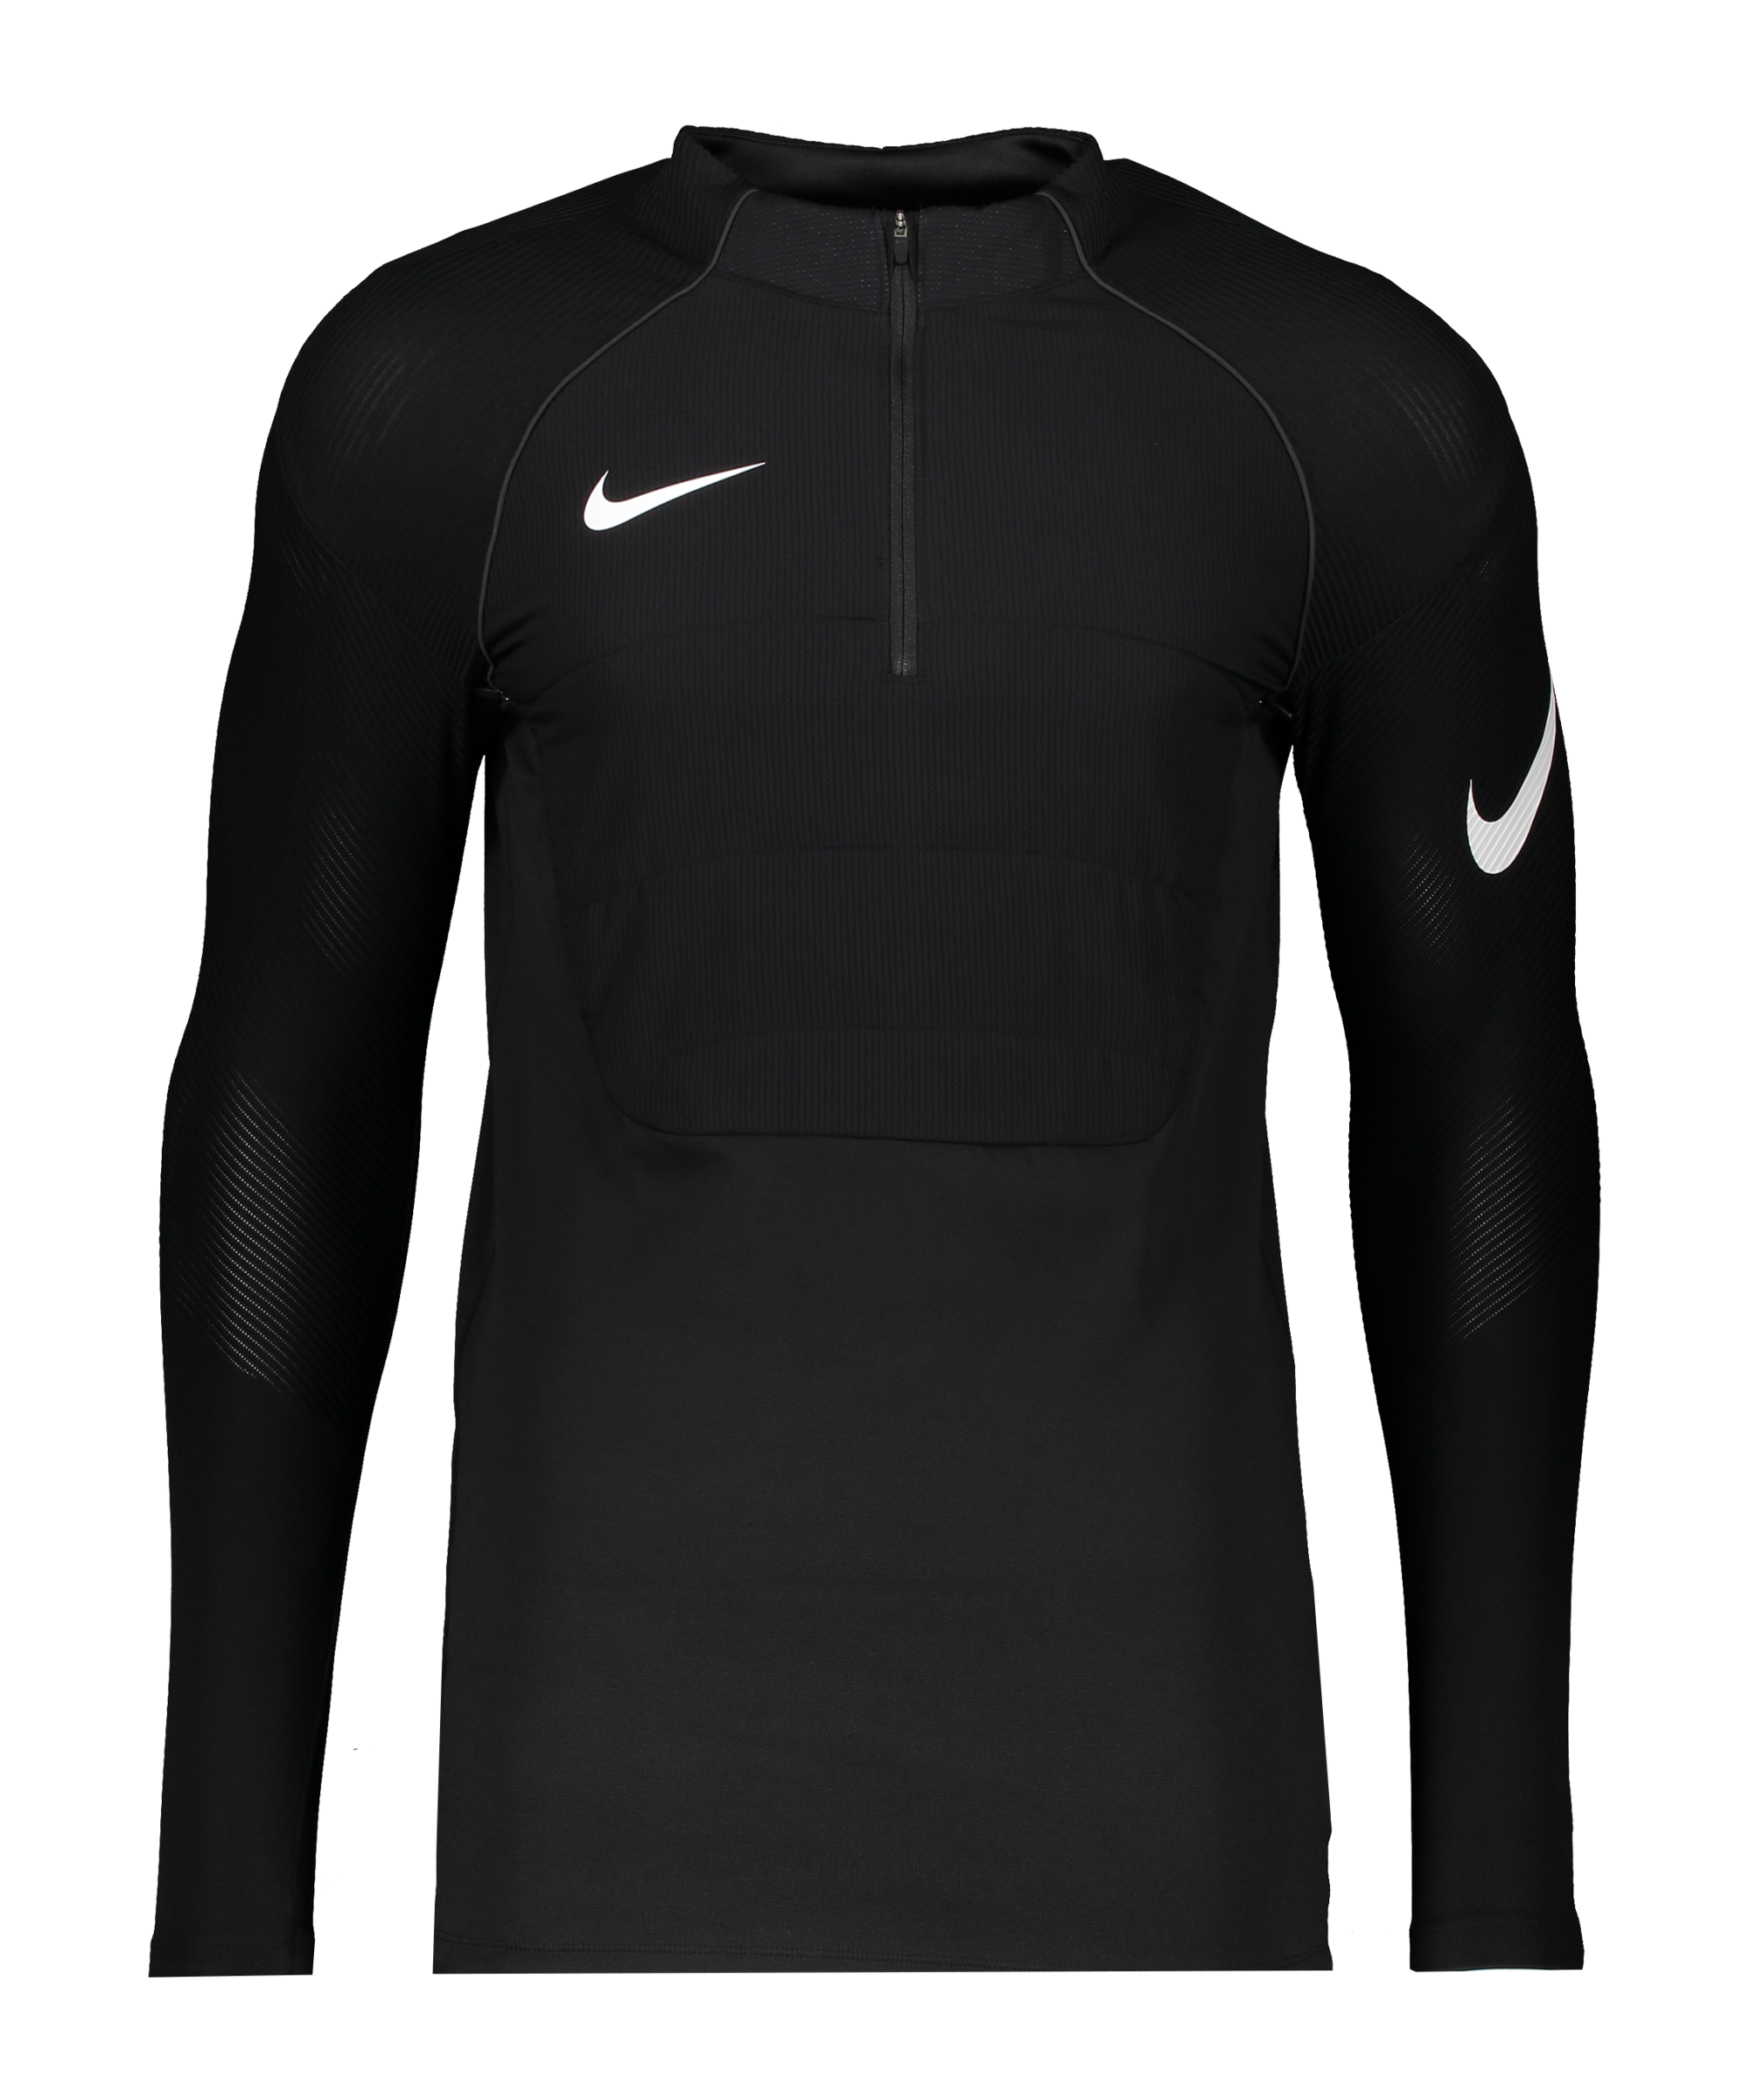 enlace Comparable interno Nike Vaporknit Strike Drill Top - Black